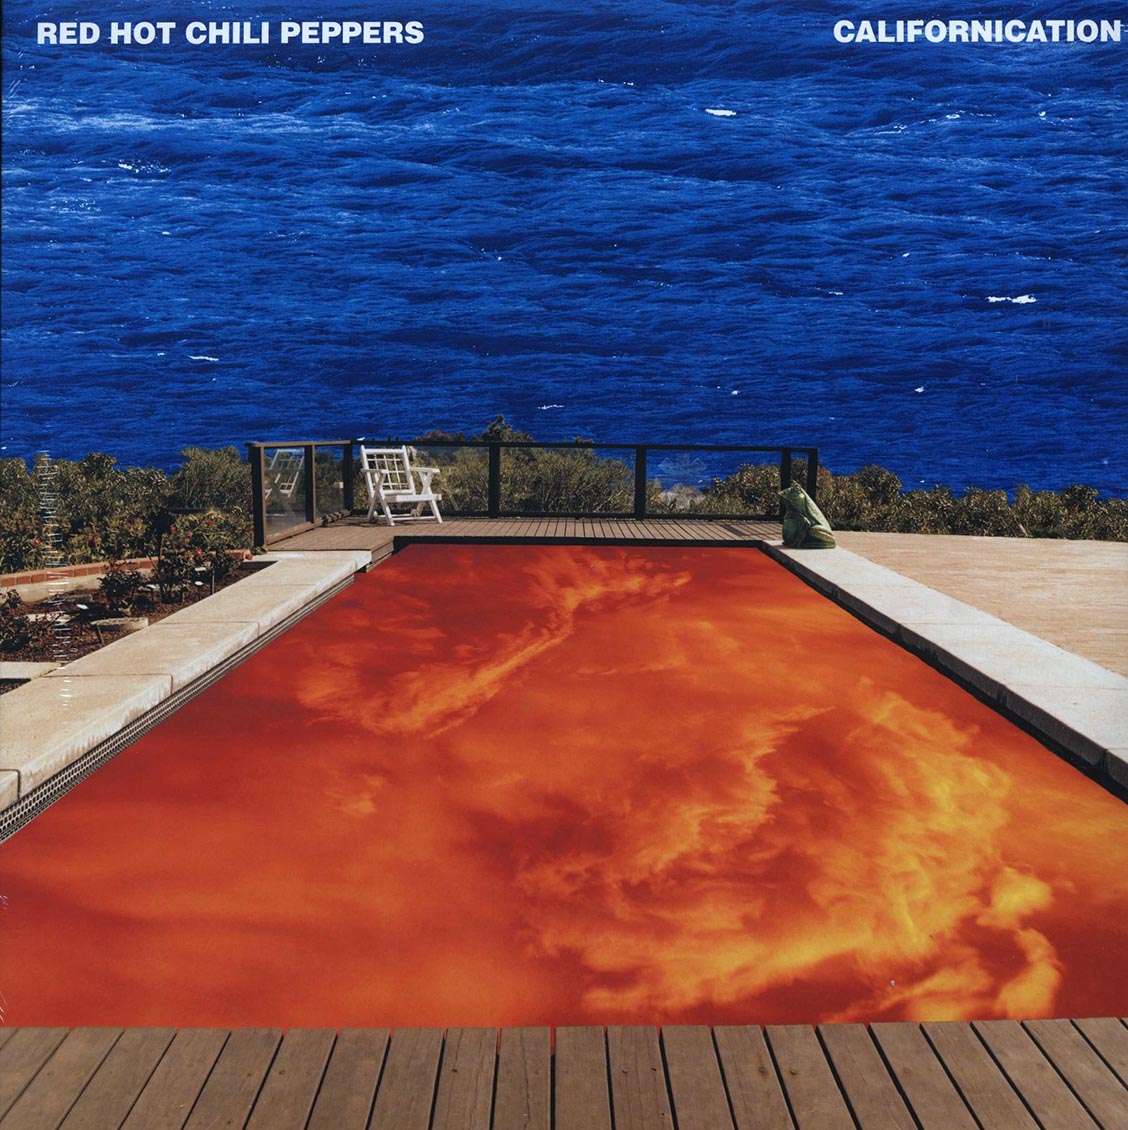 Red Hot Chili Peppers - Californication (2xLP) (180g) - Vinyl LP